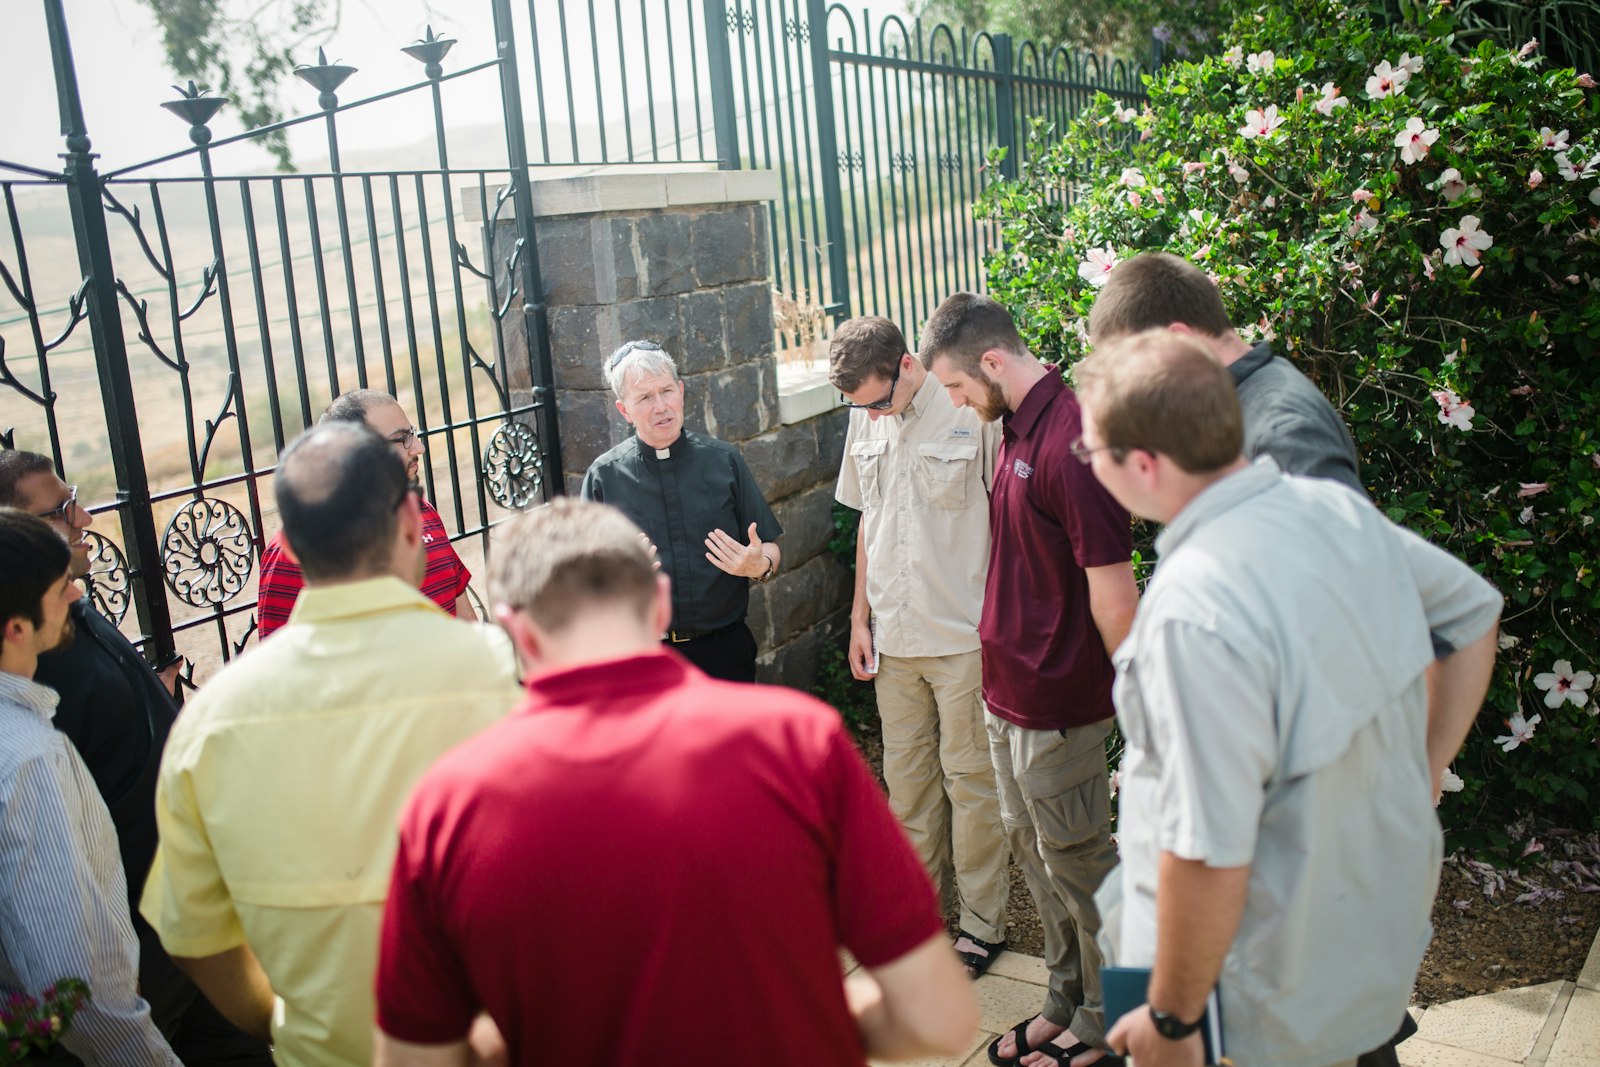 Msgr. Trapp leads a group of seminarians during a pilgrimage to the Holy Land in 2016, explaining sites important in the life of Christ and helping seminarians to pray through the experience as they discerned their own vocation as Christ's disciples and, one day, priests. (Courtesy of Sacred Heart Major Seminary)